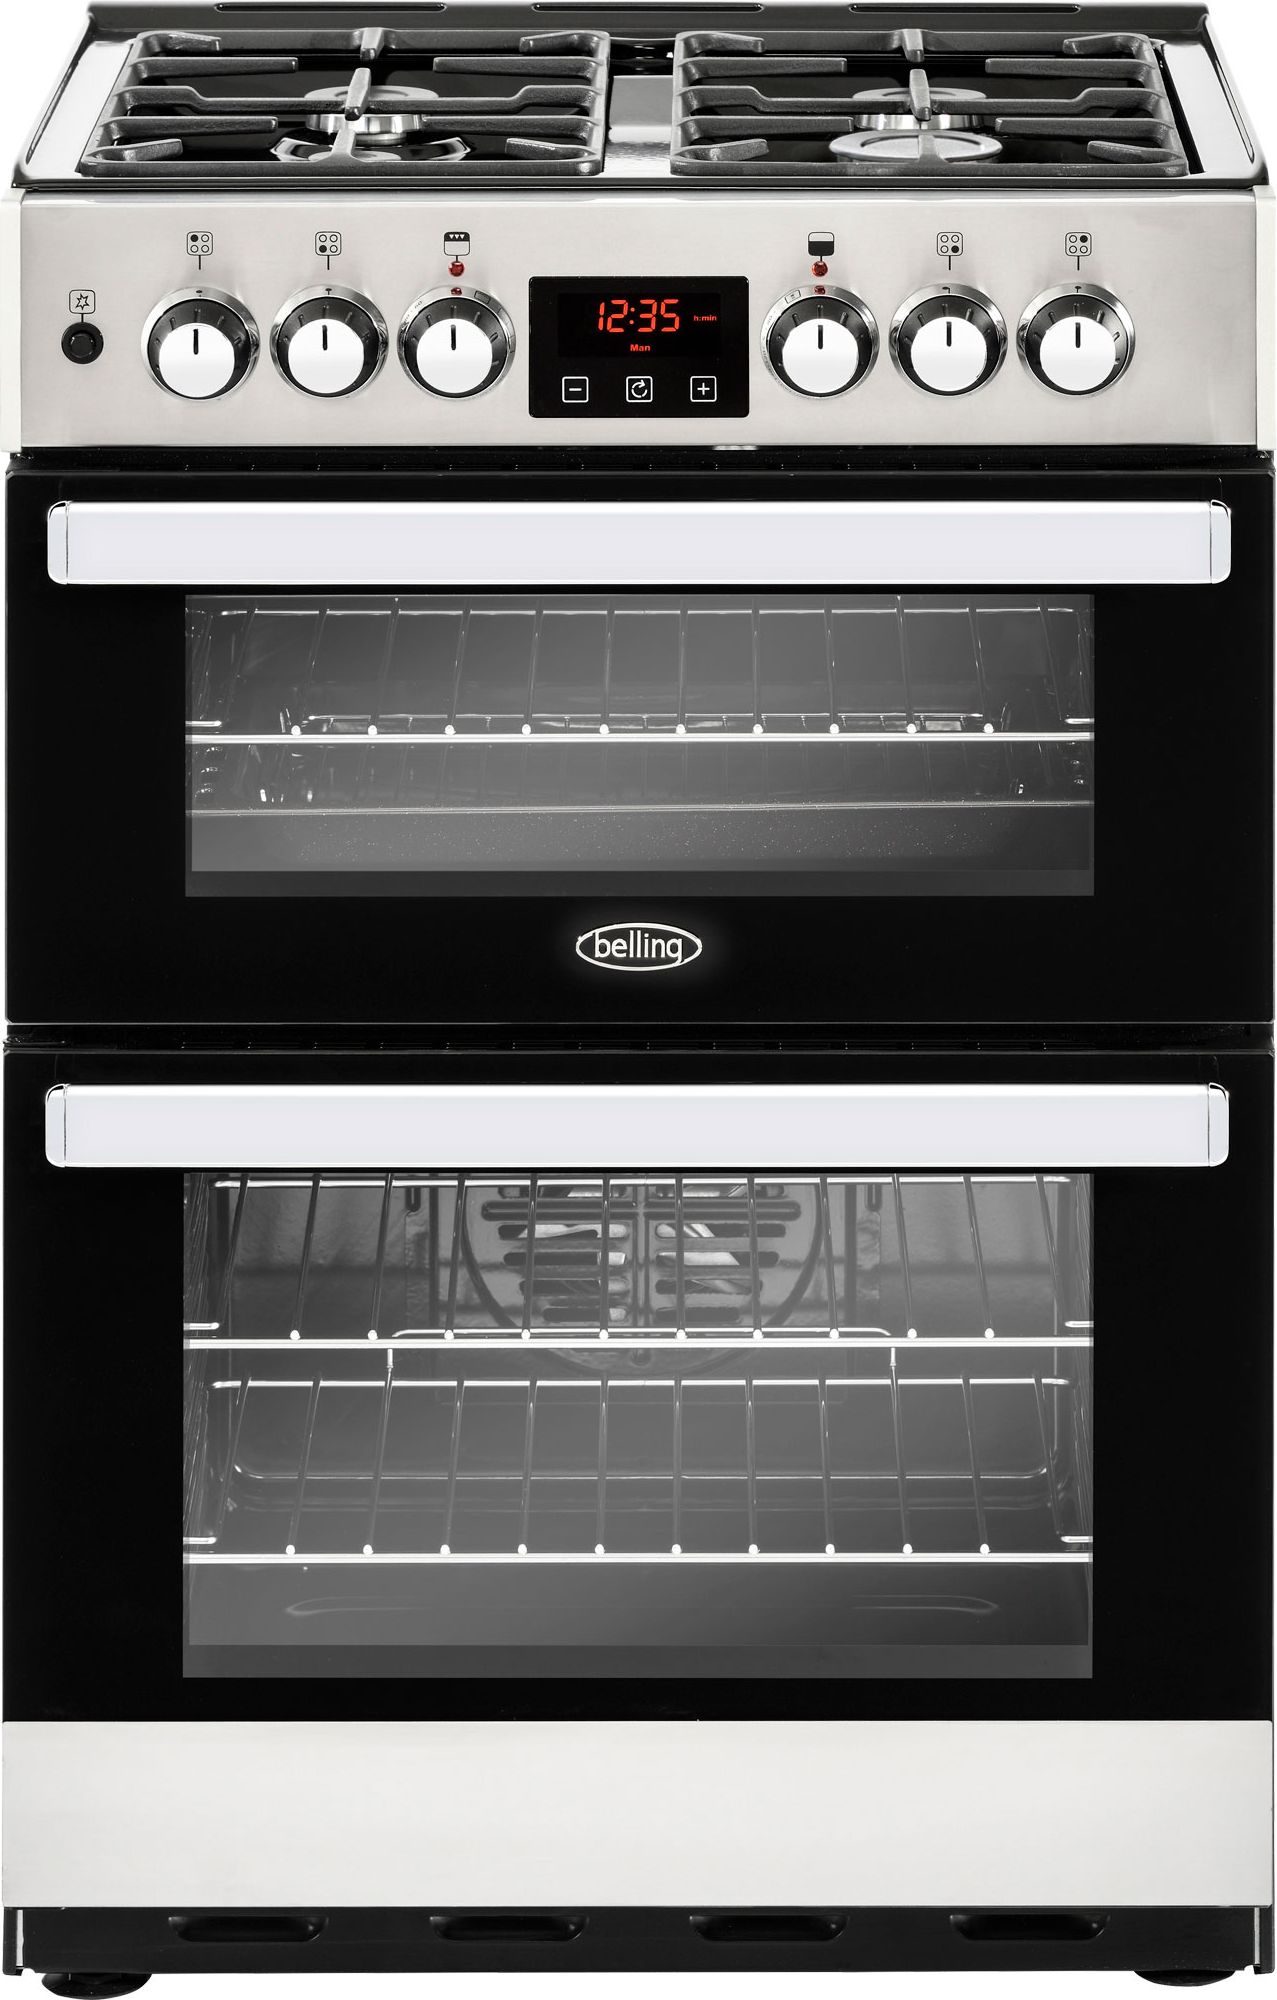 Belling Cookcentre 60DF 60cm Freestanding Dual Fuel Cooker - Stainless Steel - A/A Rated, Stainless Steel